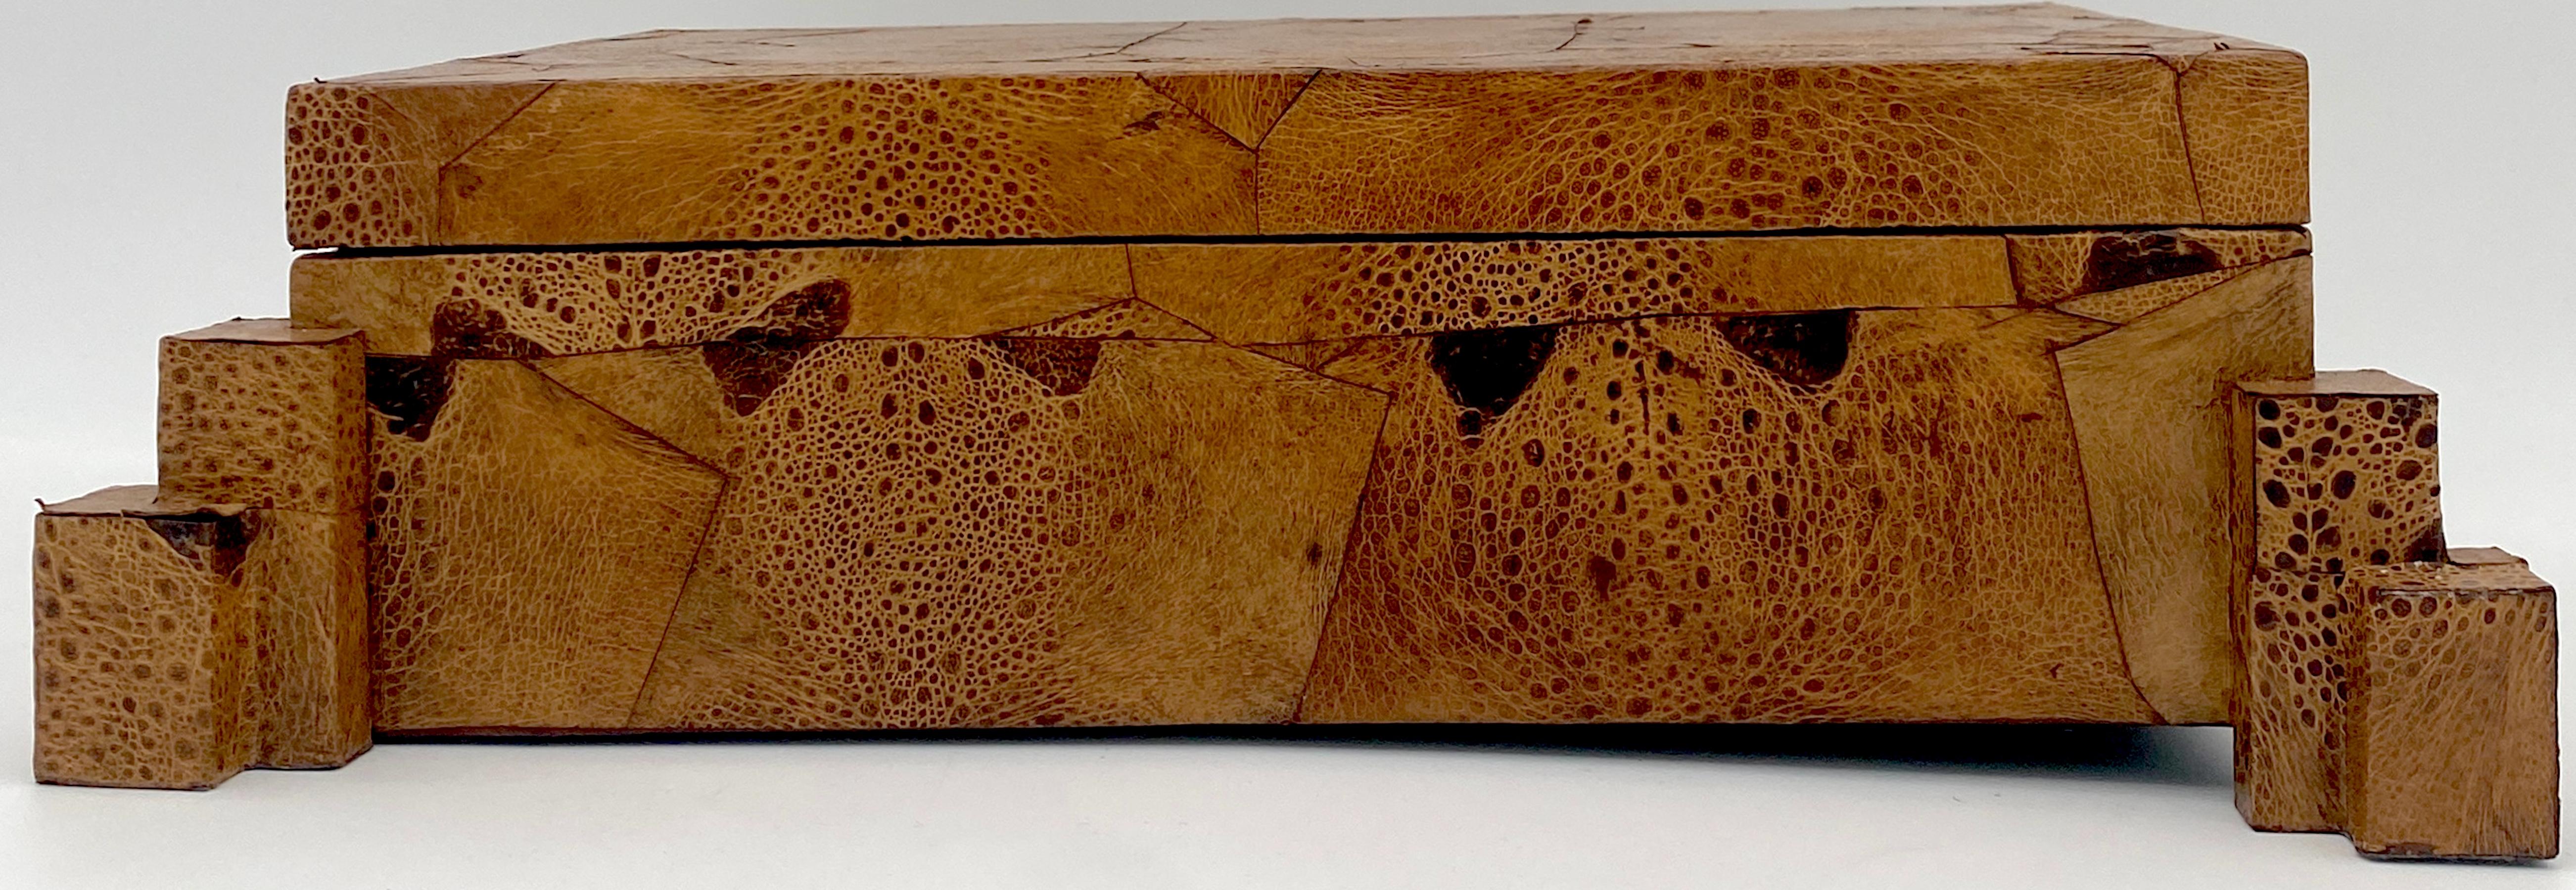 Exotic 1970s Frog Skin-Leather Asymmetrical Table Box, Style of Karl Springer  In Good Condition For Sale In West Palm Beach, FL